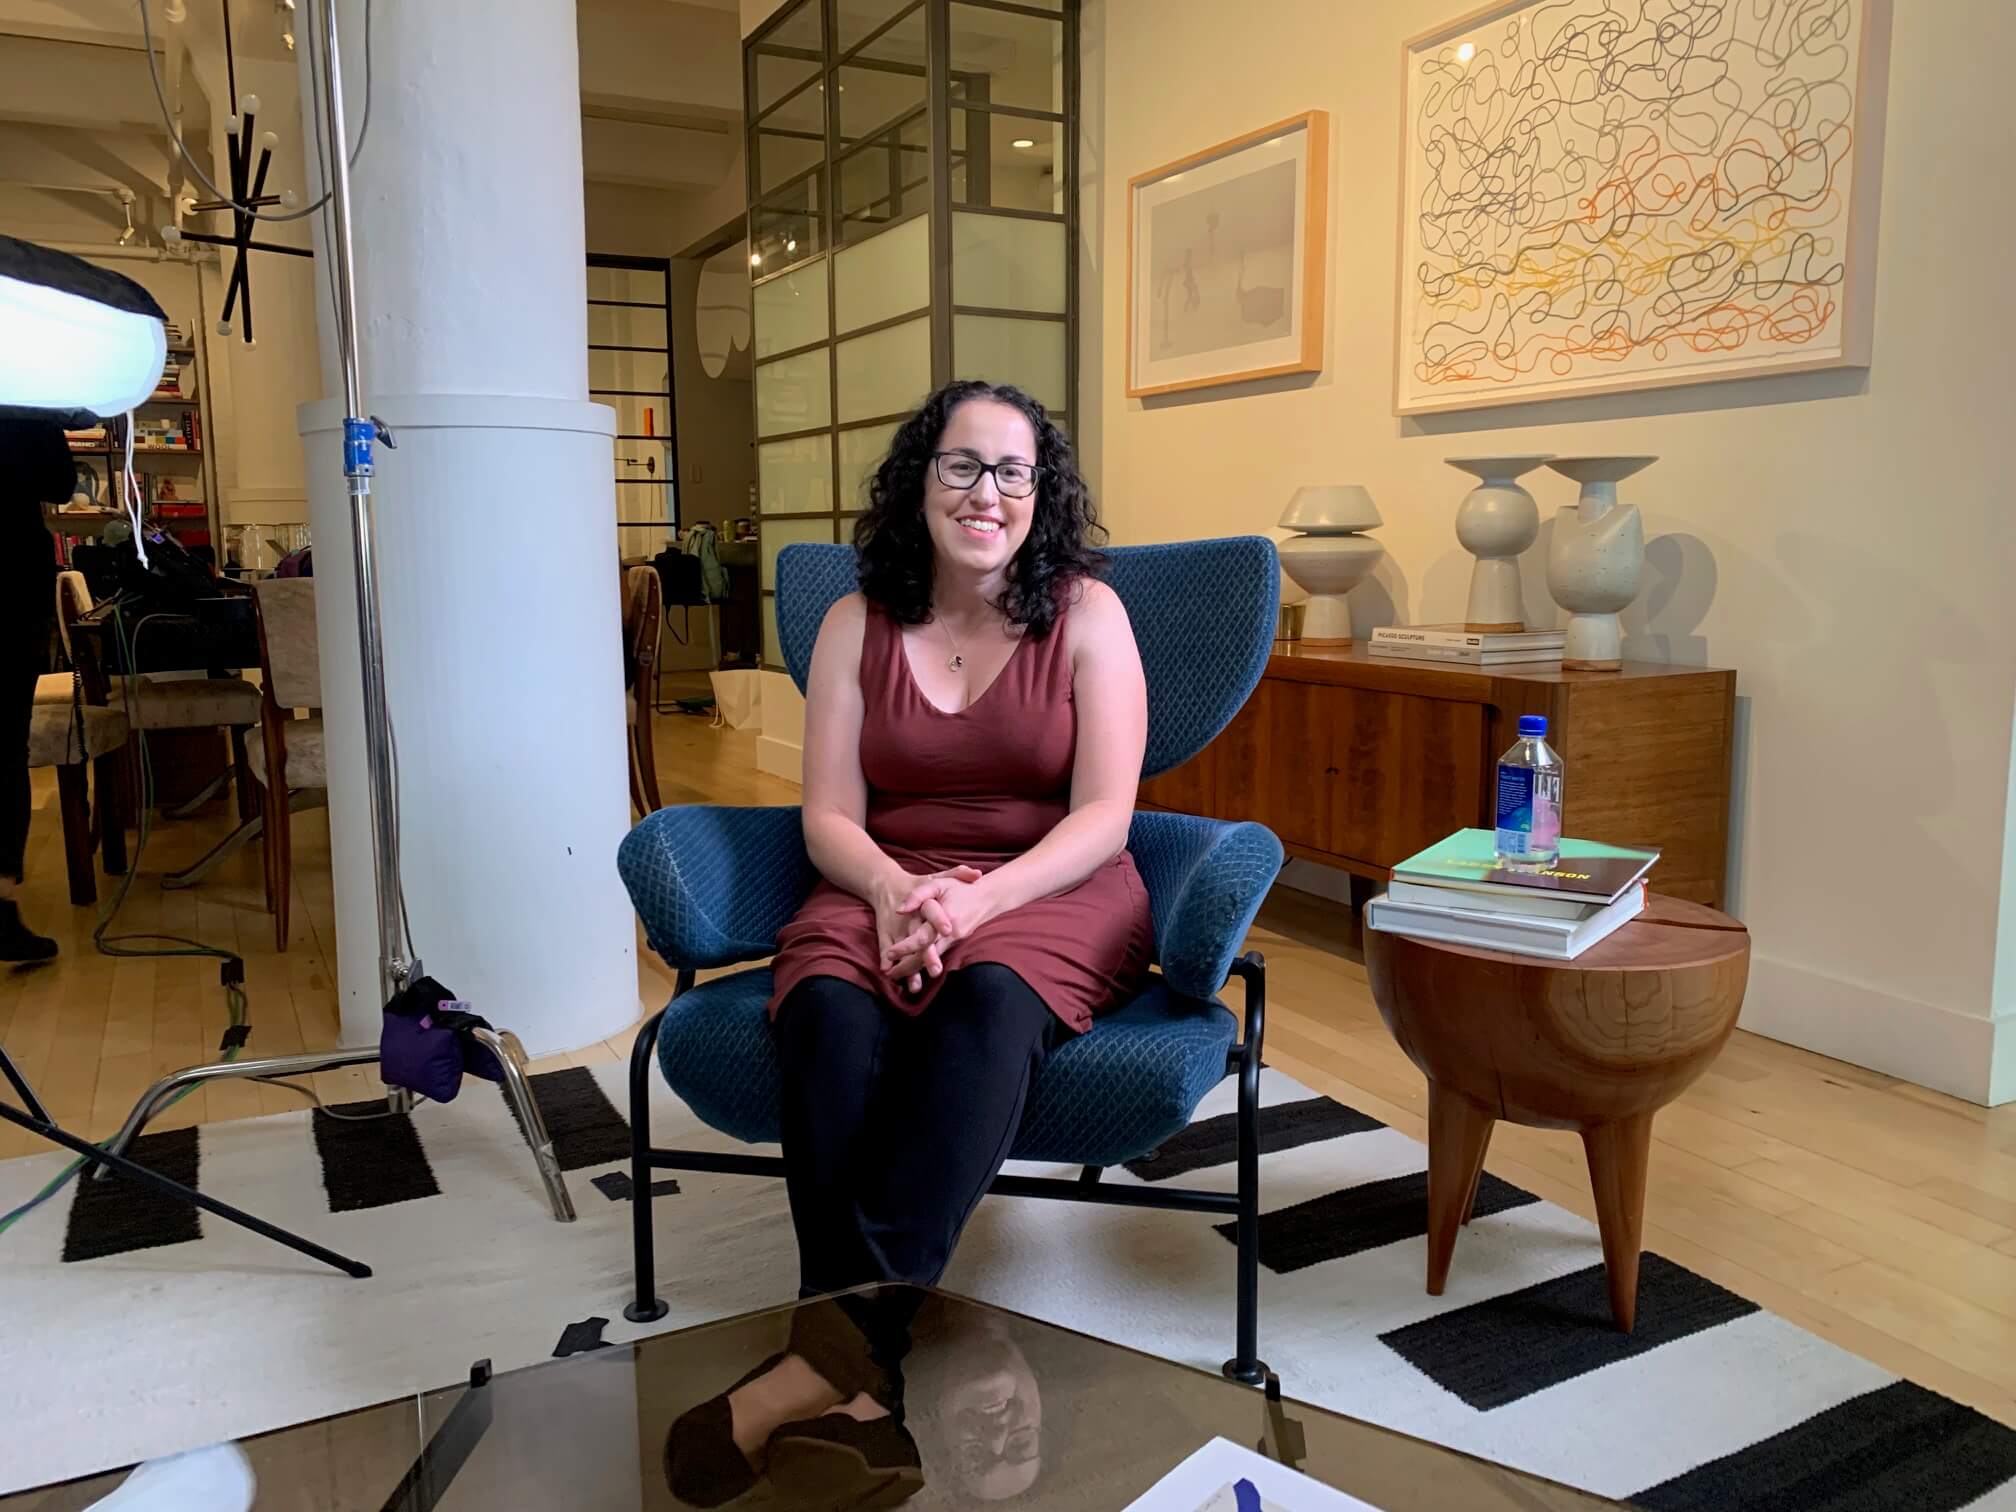 till from Hollywood Does Abortion. Steph Herold looking directly at the camera. She is wearing glasses and a sleeveless dress, sitting in a living room chair. WA light stand and light are additionally in the foreground.